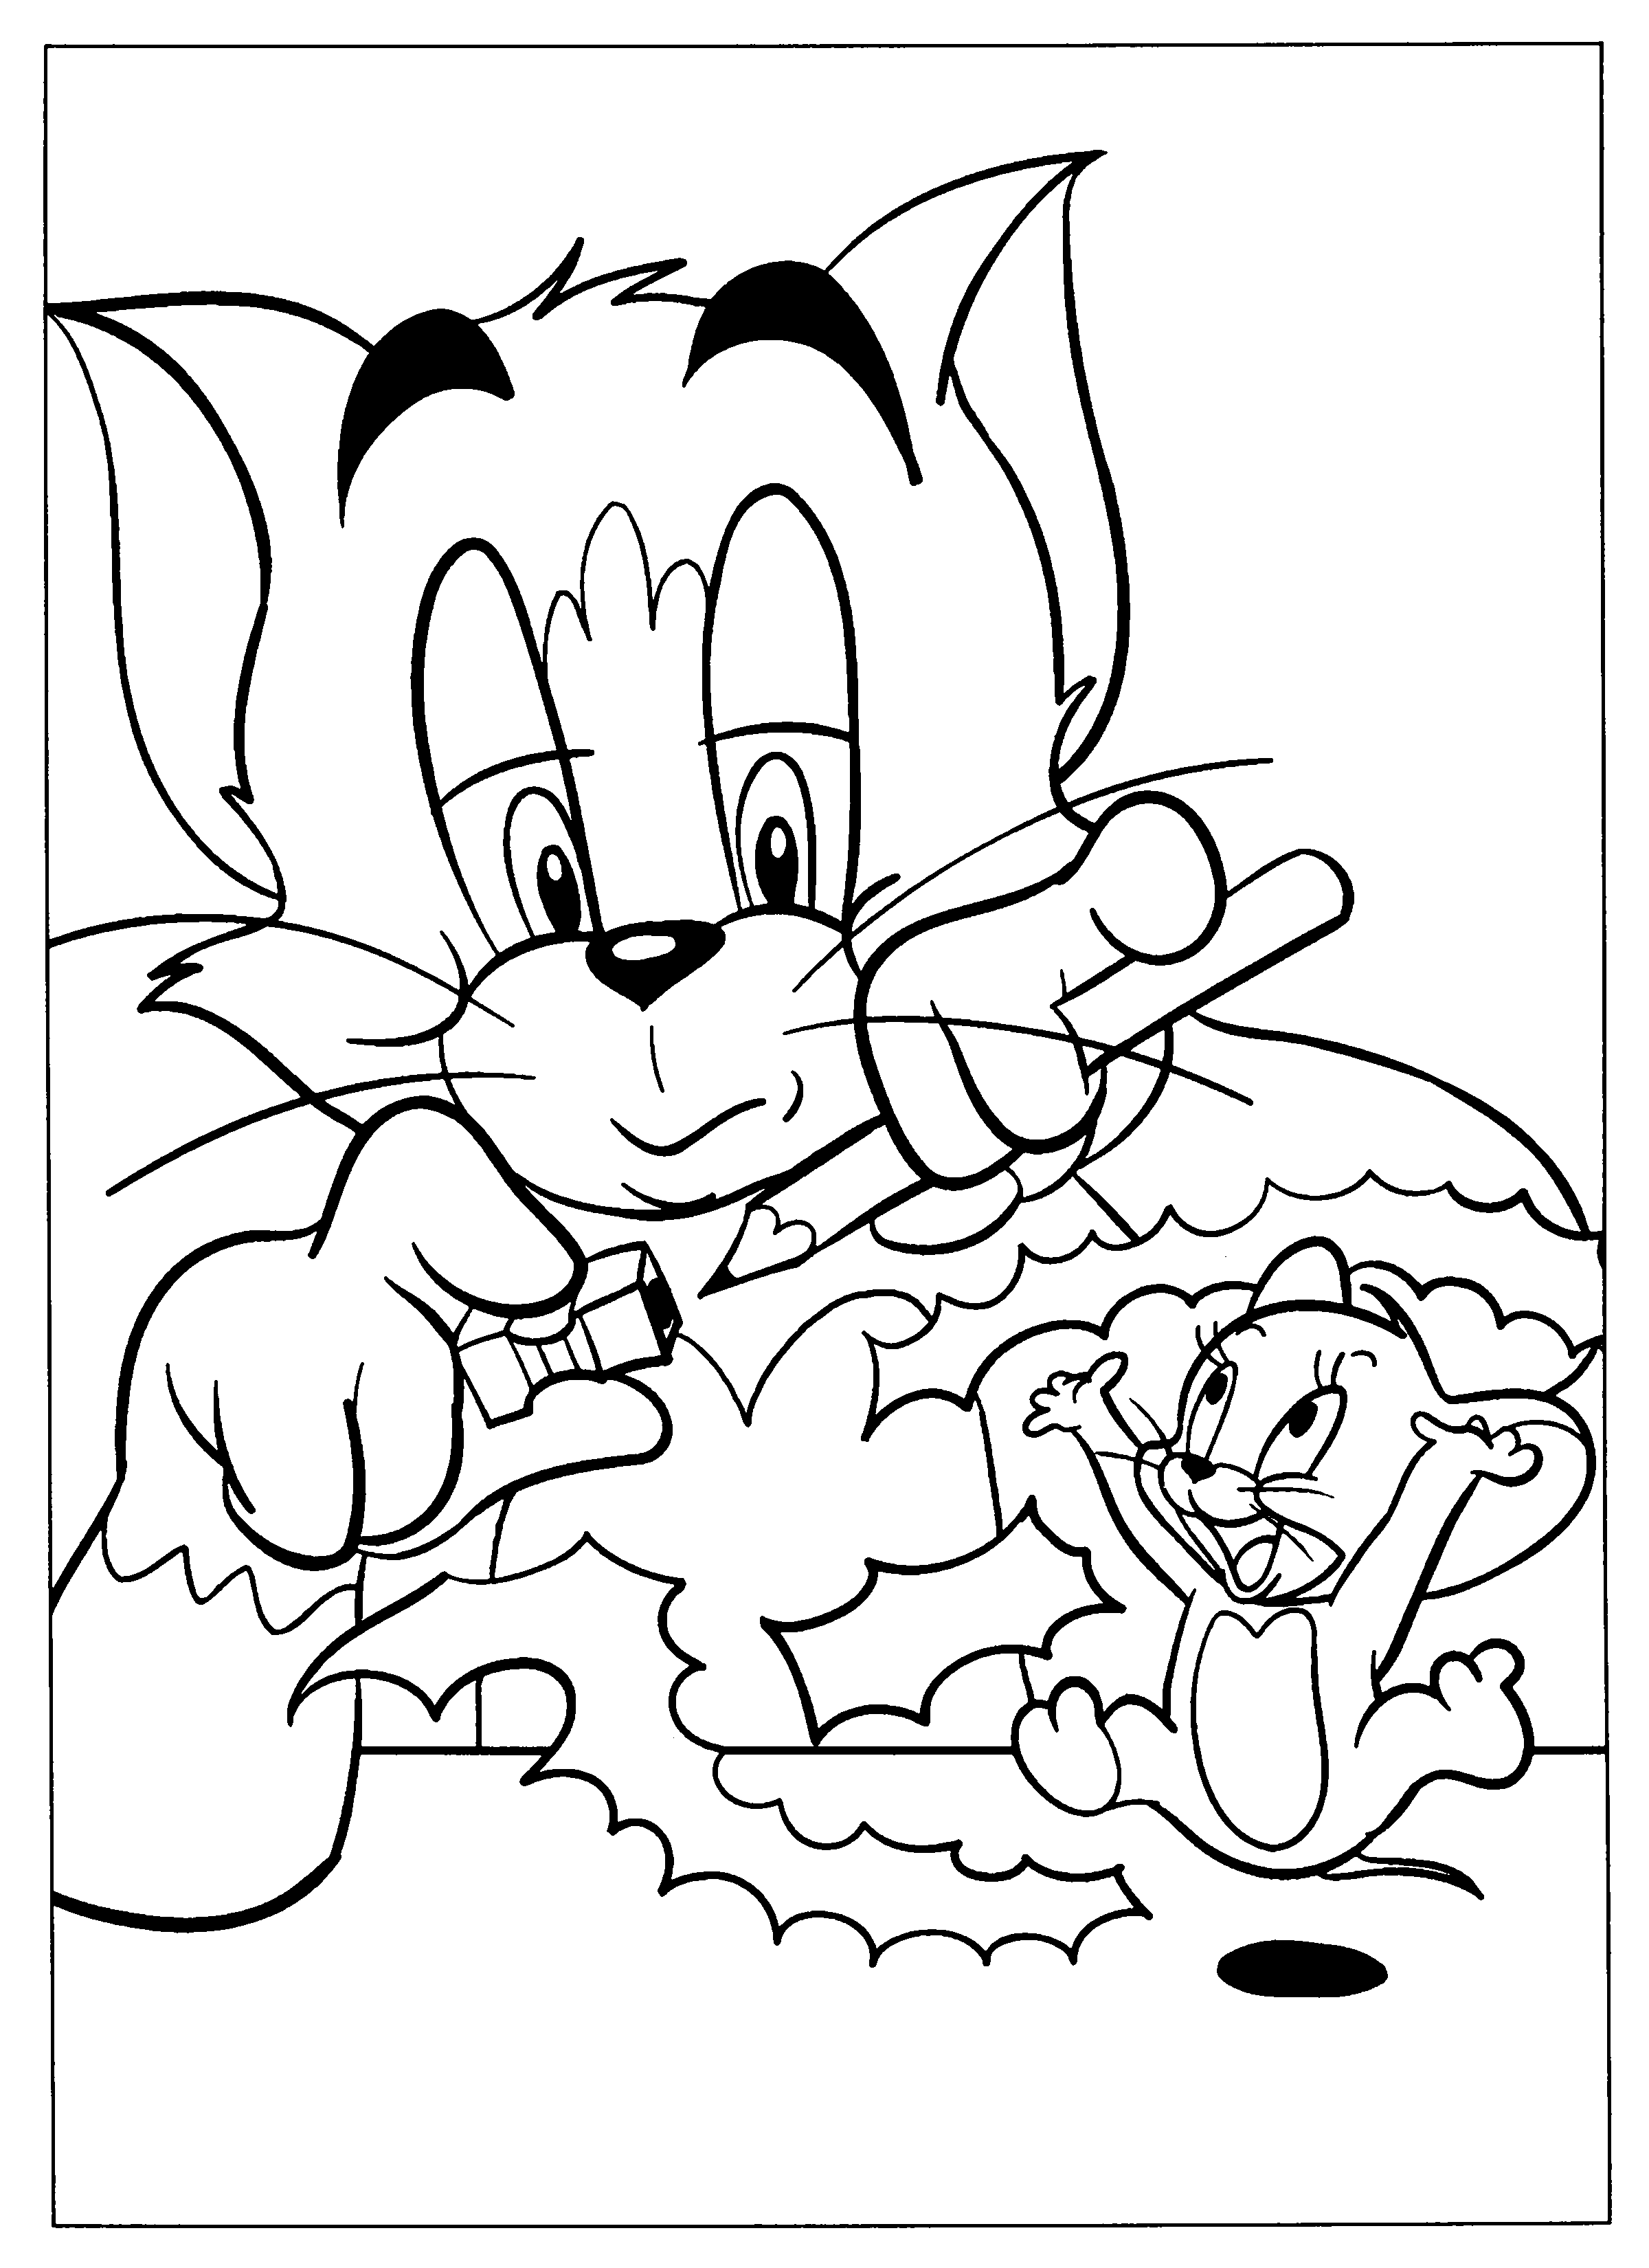 tom and jerry coloring pages online tom and jerry coloring pages coloringpages1001com pages jerry and online coloring tom 